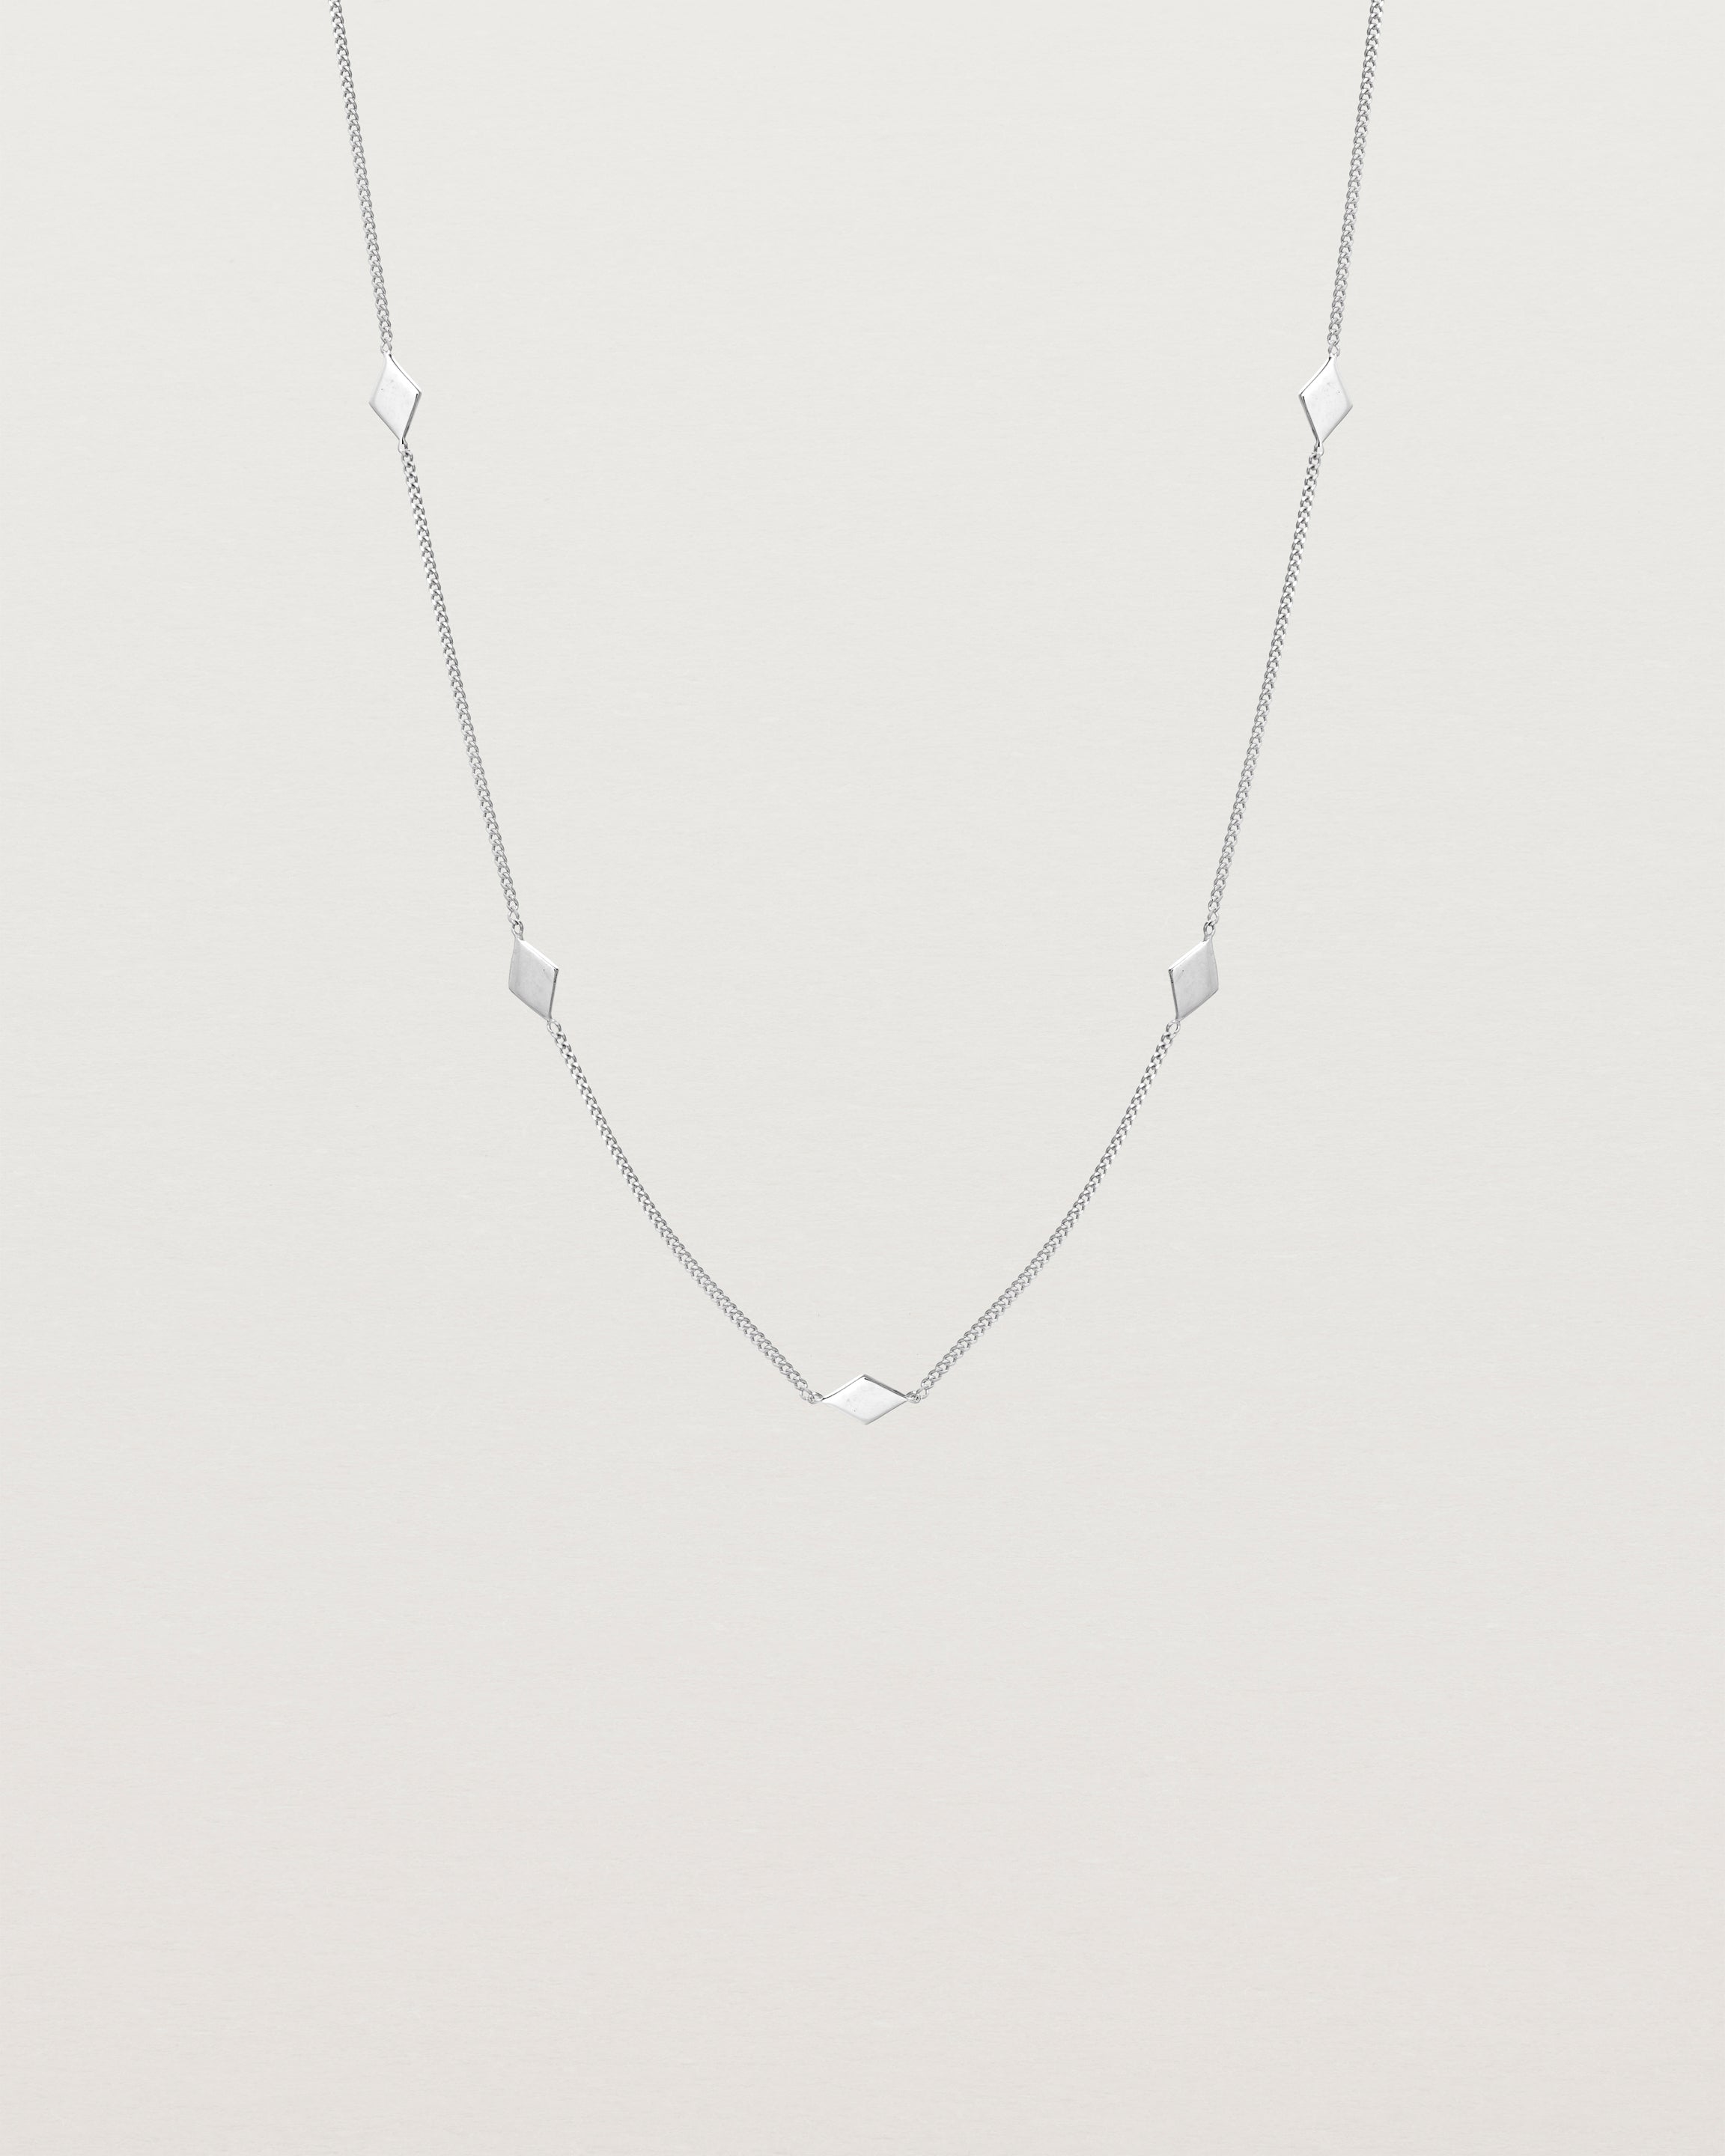 Front view of the Nuna Charm Necklace in sterling silver.